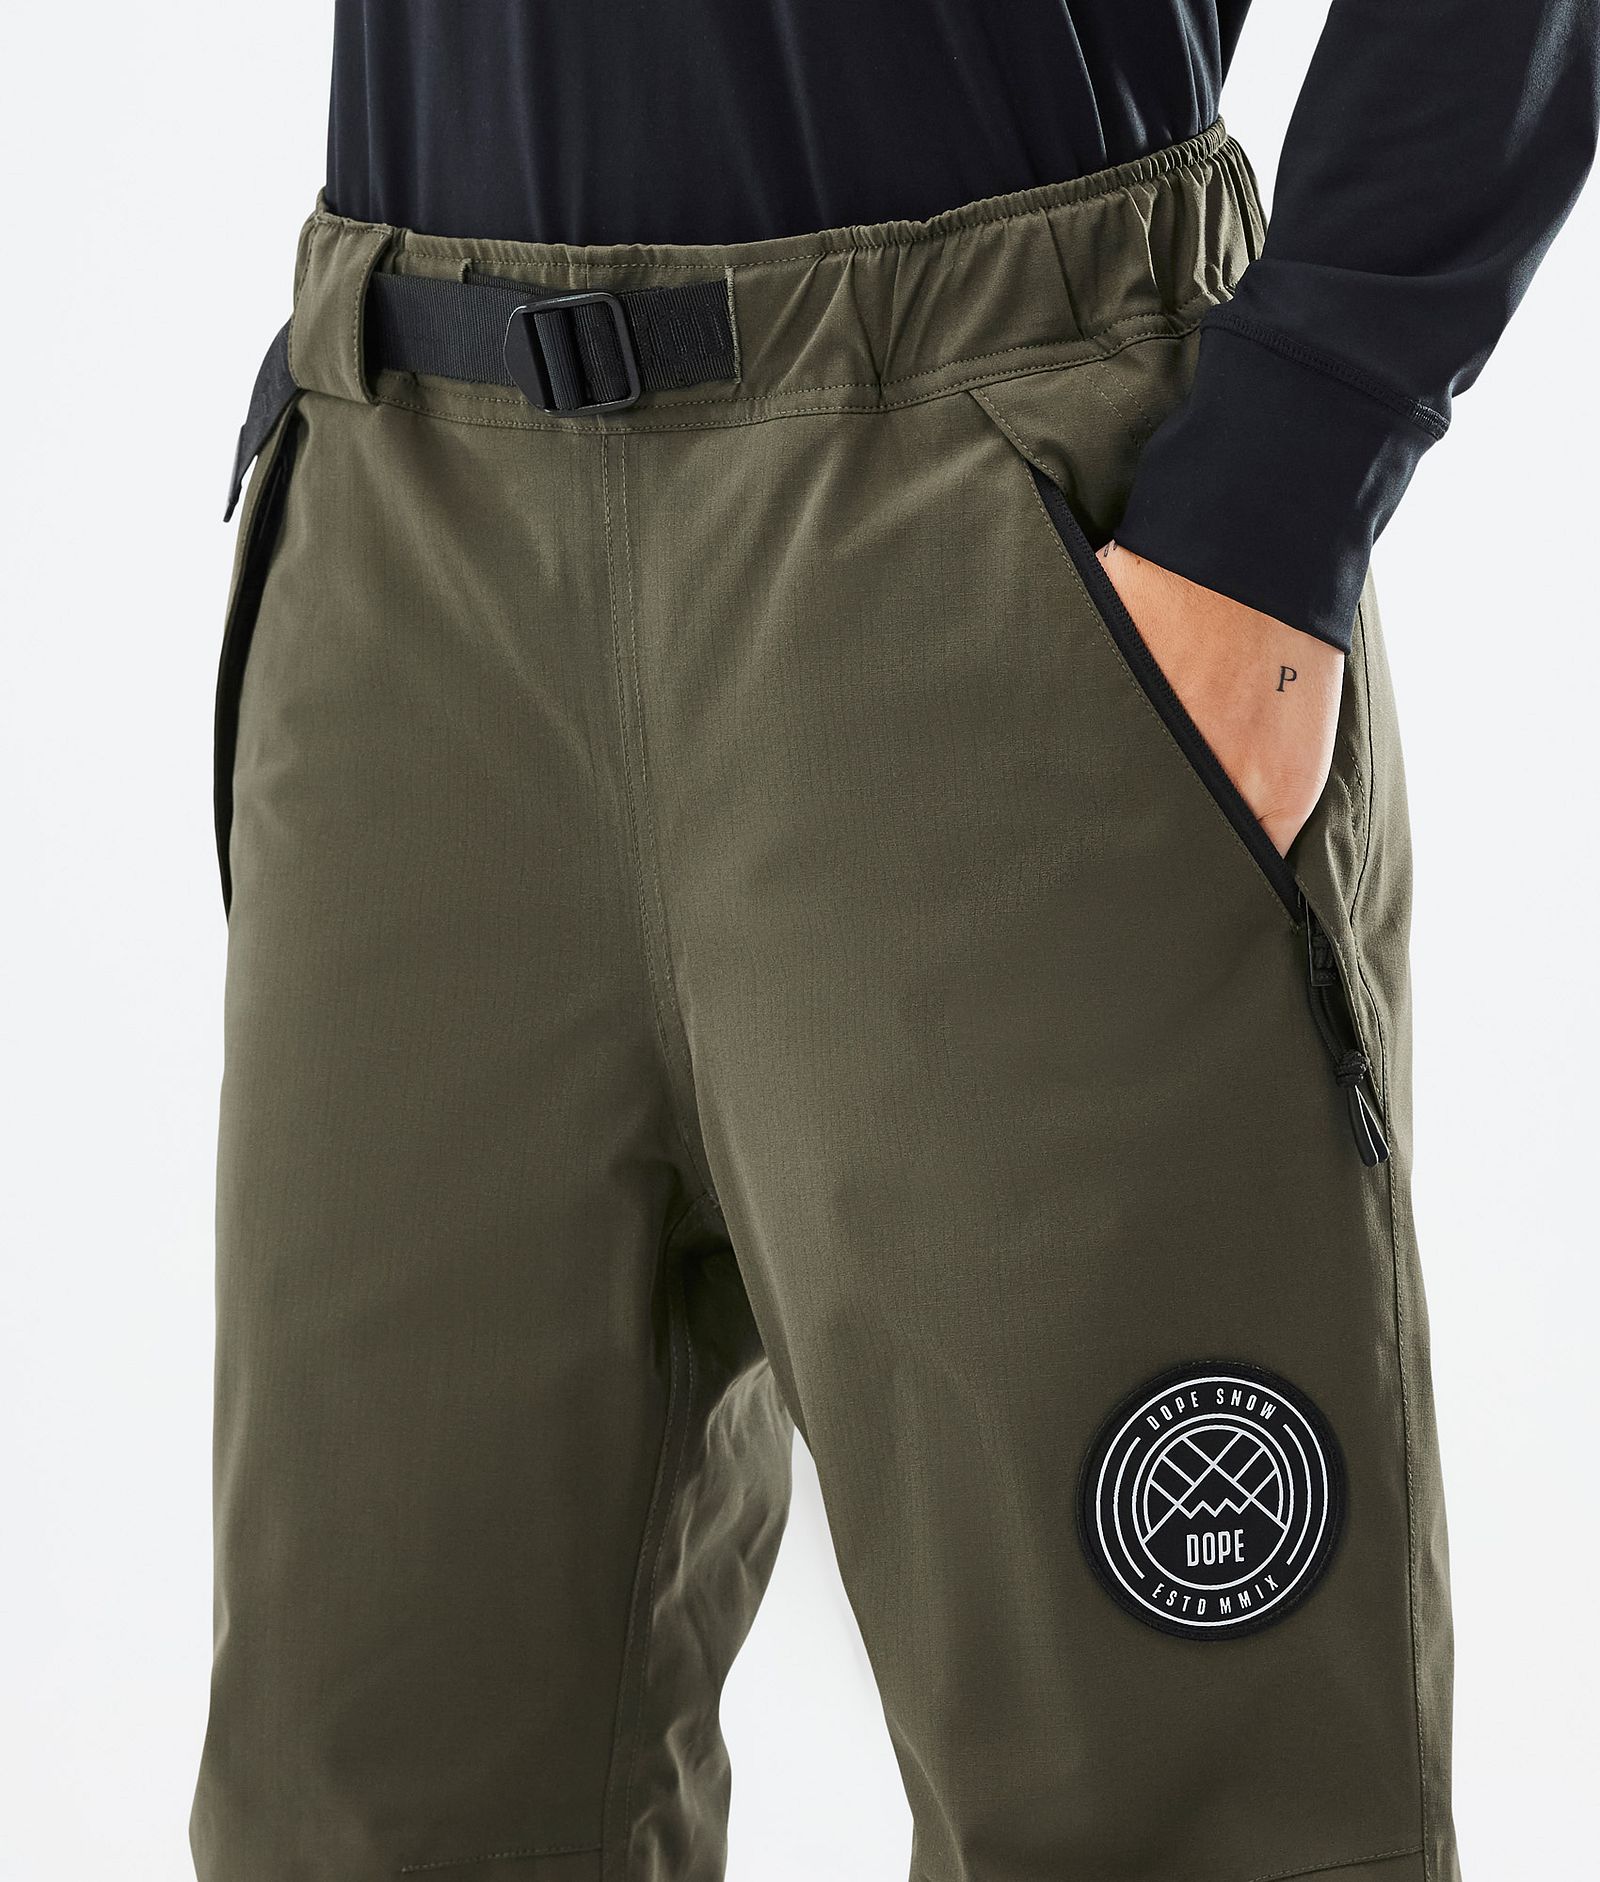 Dope Blizzard W 2022 Pantalones Snowboard Mujer Olive Green